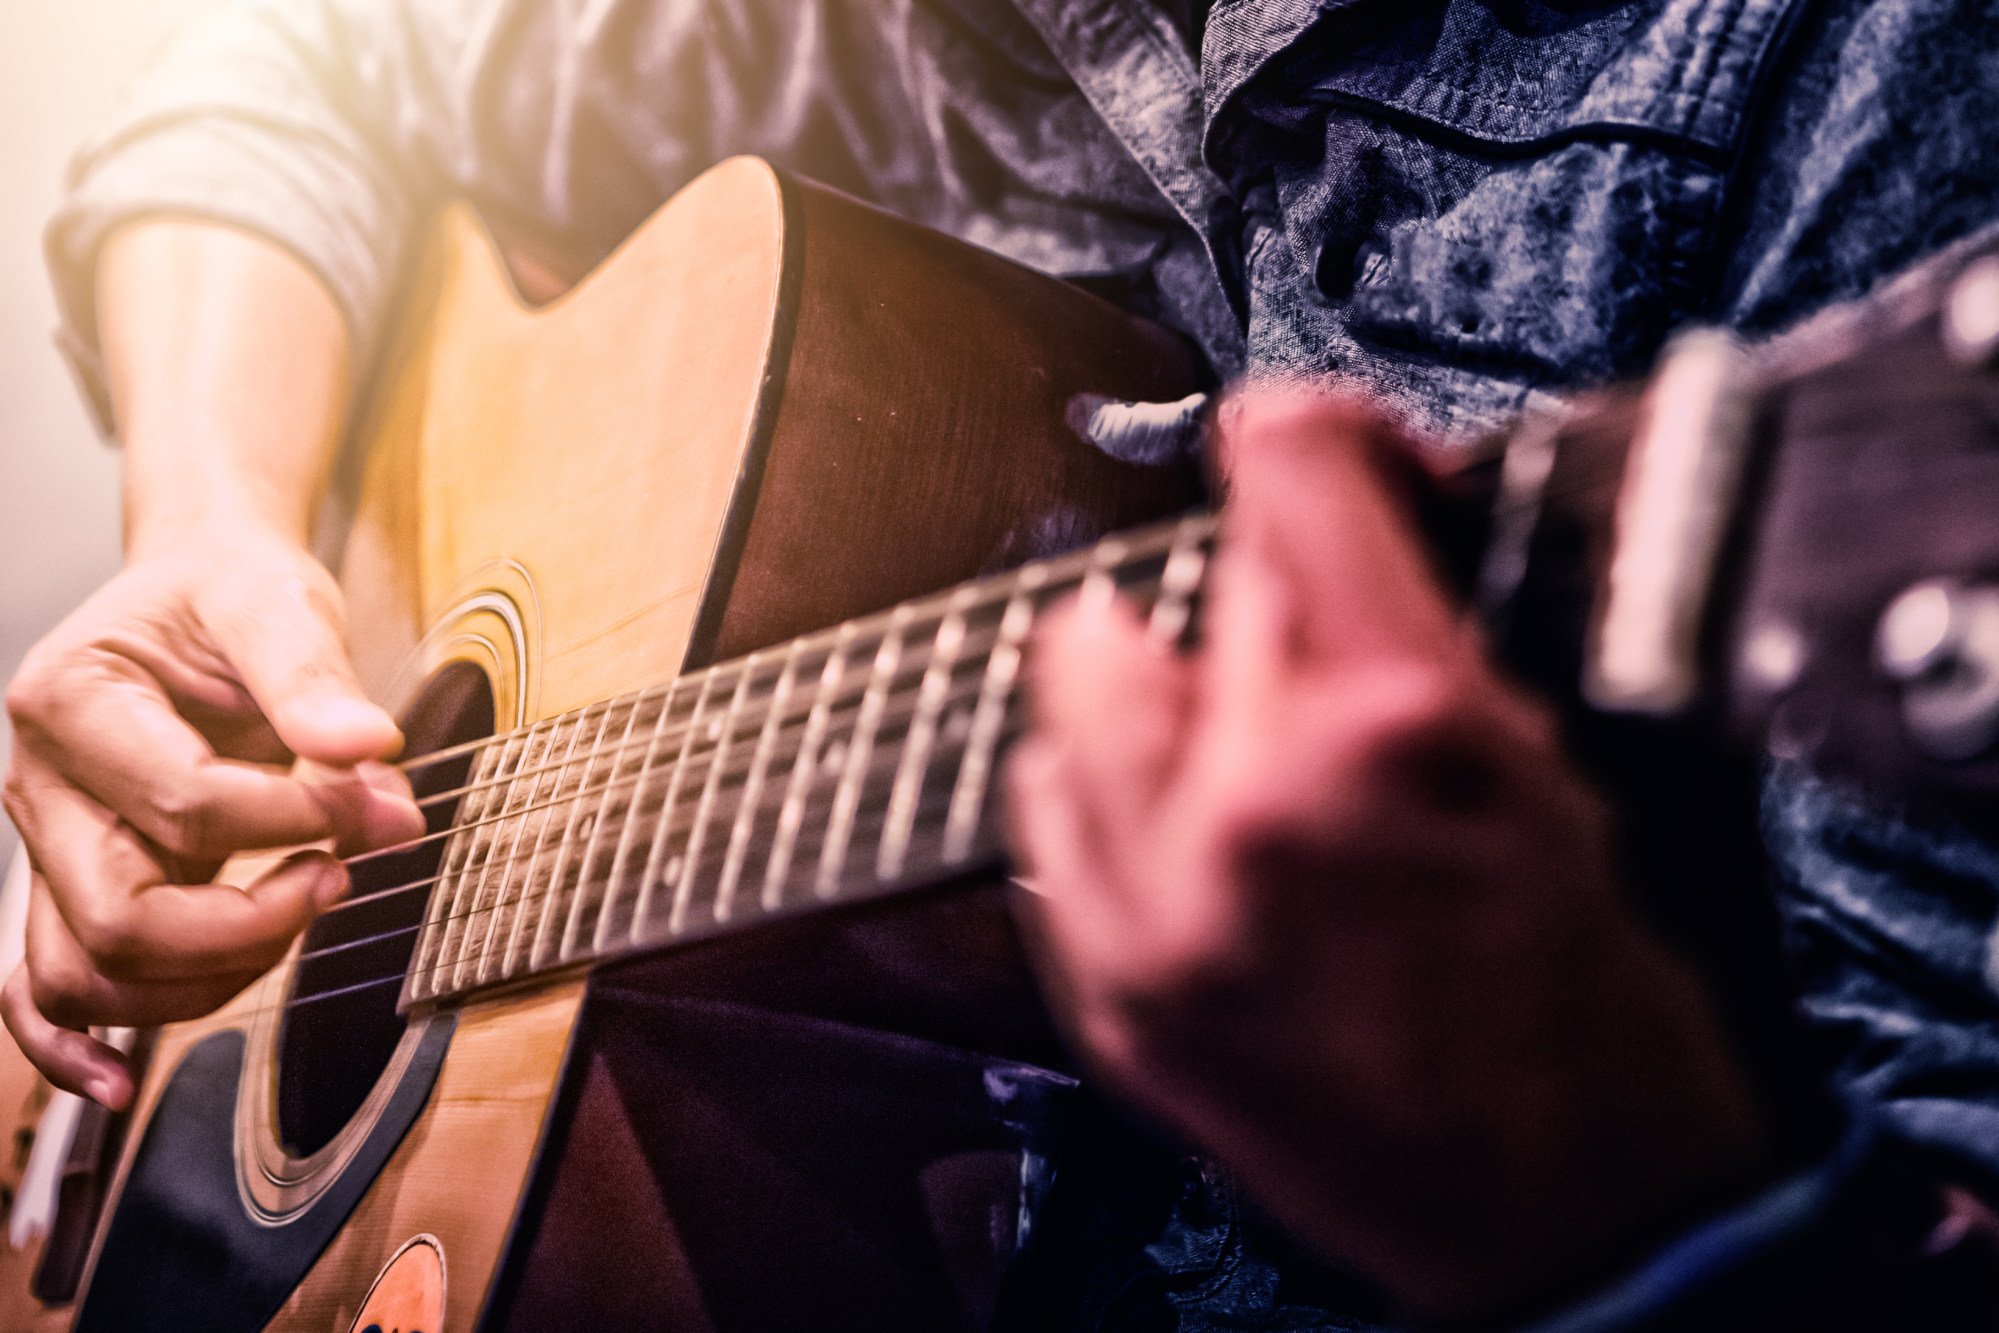 Classical guitarist Michael Tsui* saw his earnings from teaching music plummet after his conviction. Photo: Shutterstock